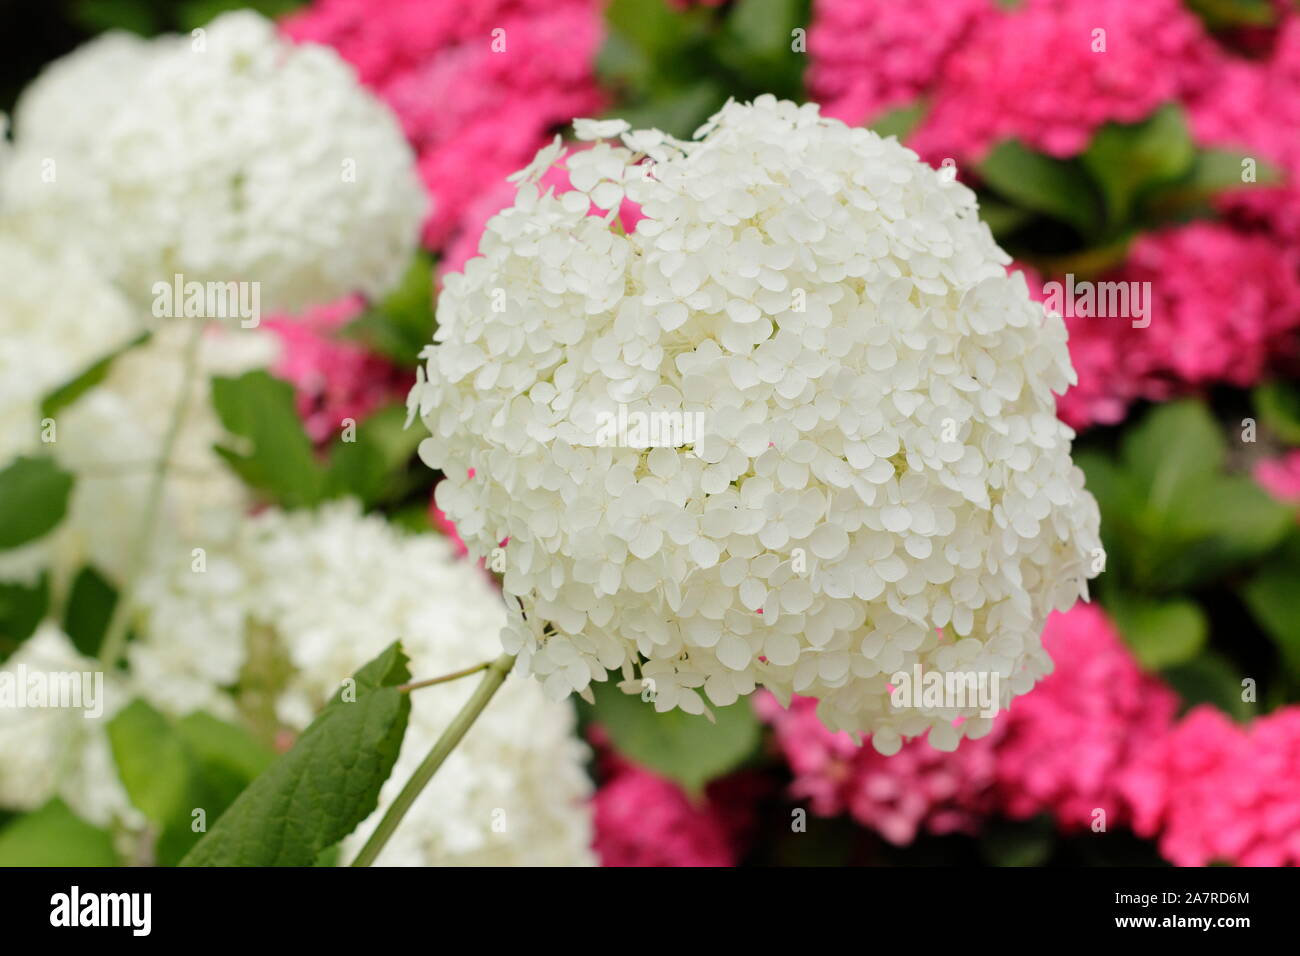 Hydrangea arborescens Annabelle displaying distinctive large blooms in August. UK Stock Photo